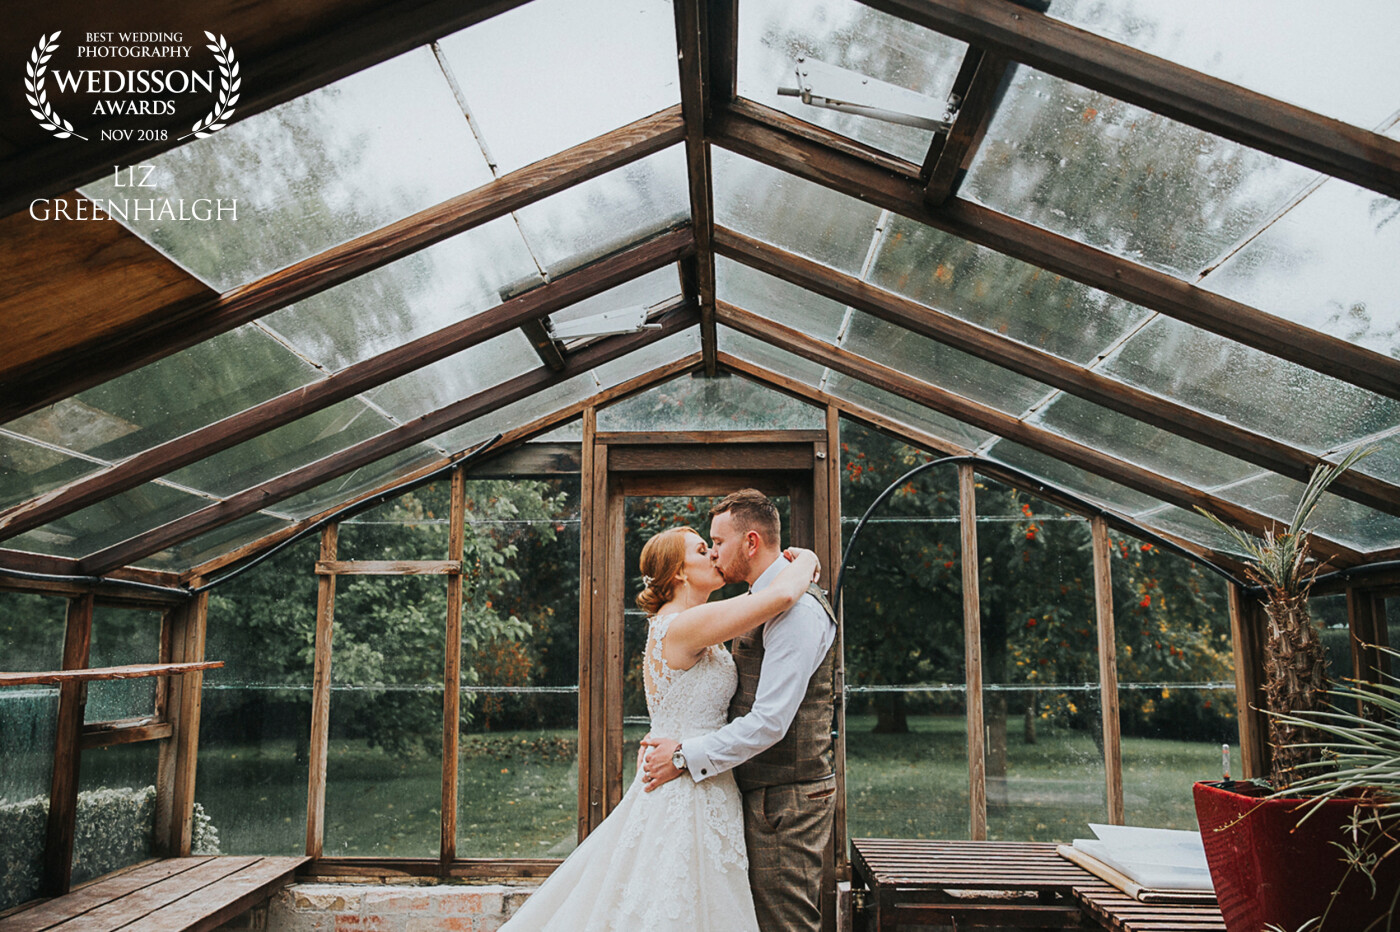 A dash to hide from the rain in this gorgeous wooden greenhouse. A sneaky kiss for these two and a moment alone at Hockwold Hall Norfolk.